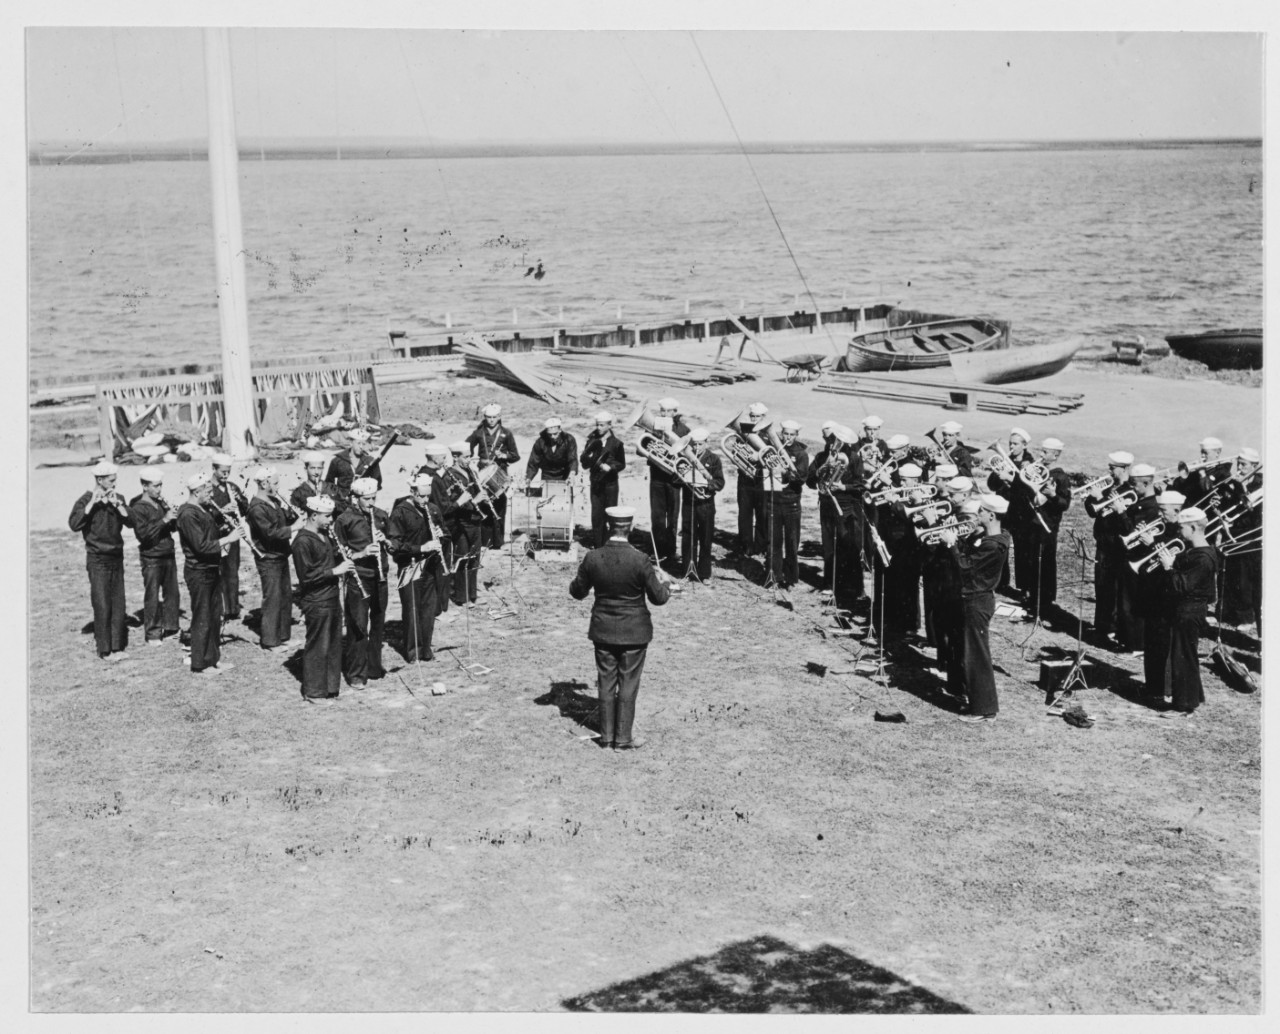 Band concert. Cape May (Sewells Point), New Jersey